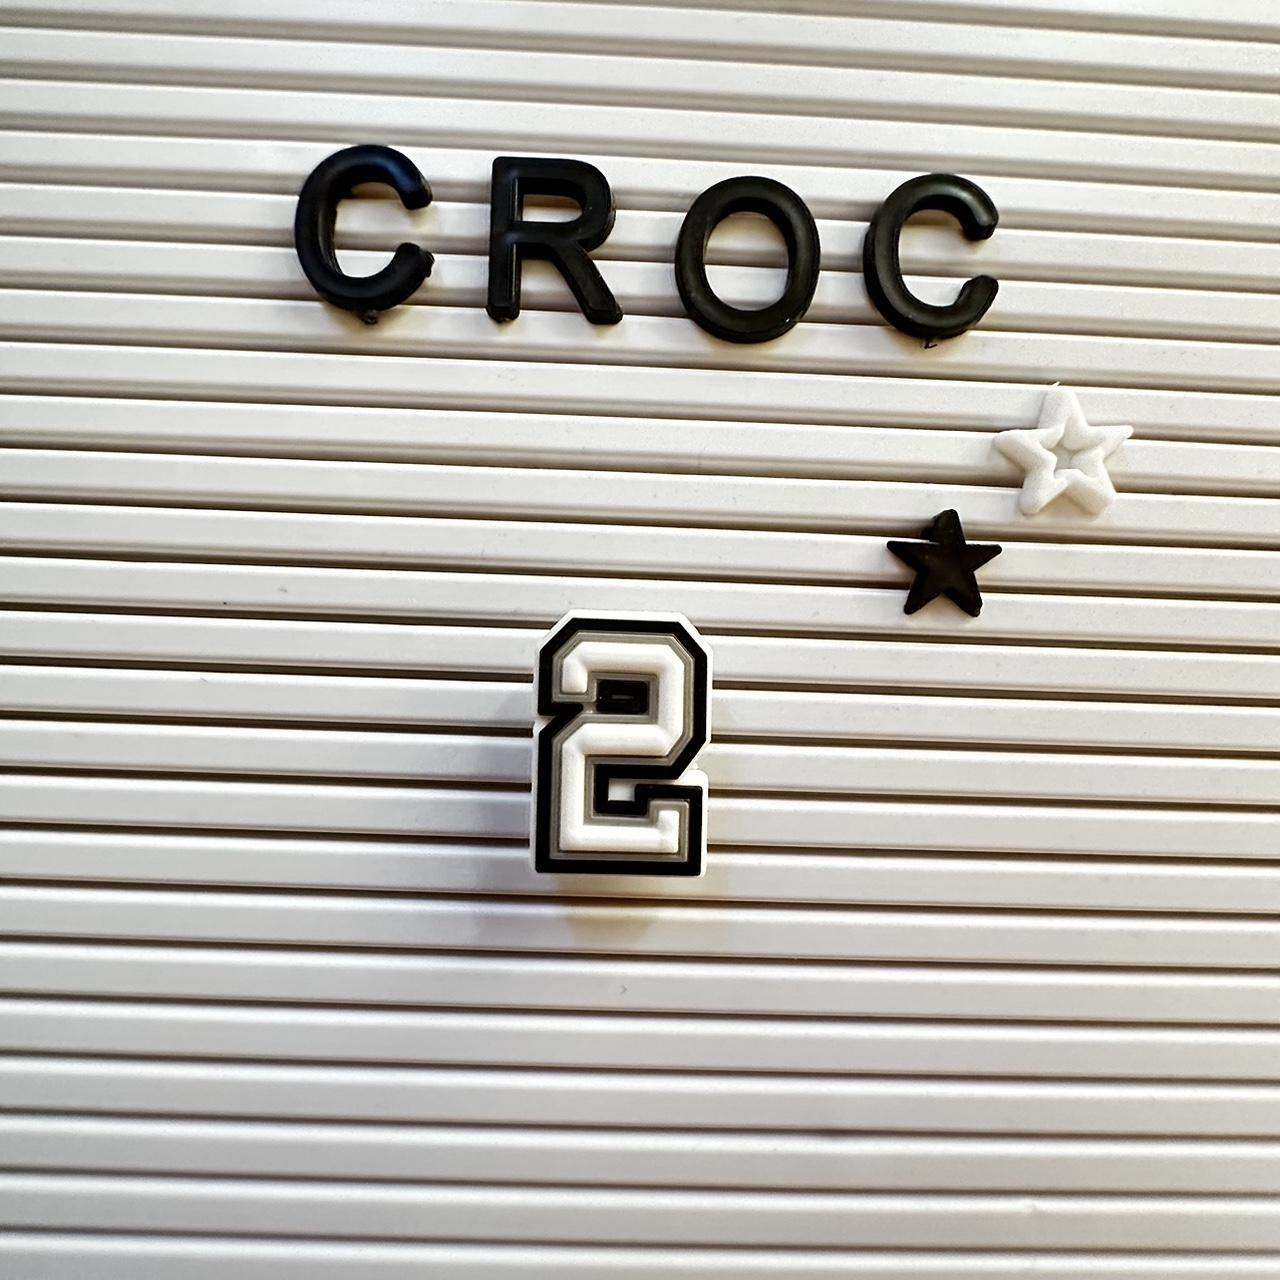 Croc charm - letters ALL LETTERS AVAILABLE, message - Depop